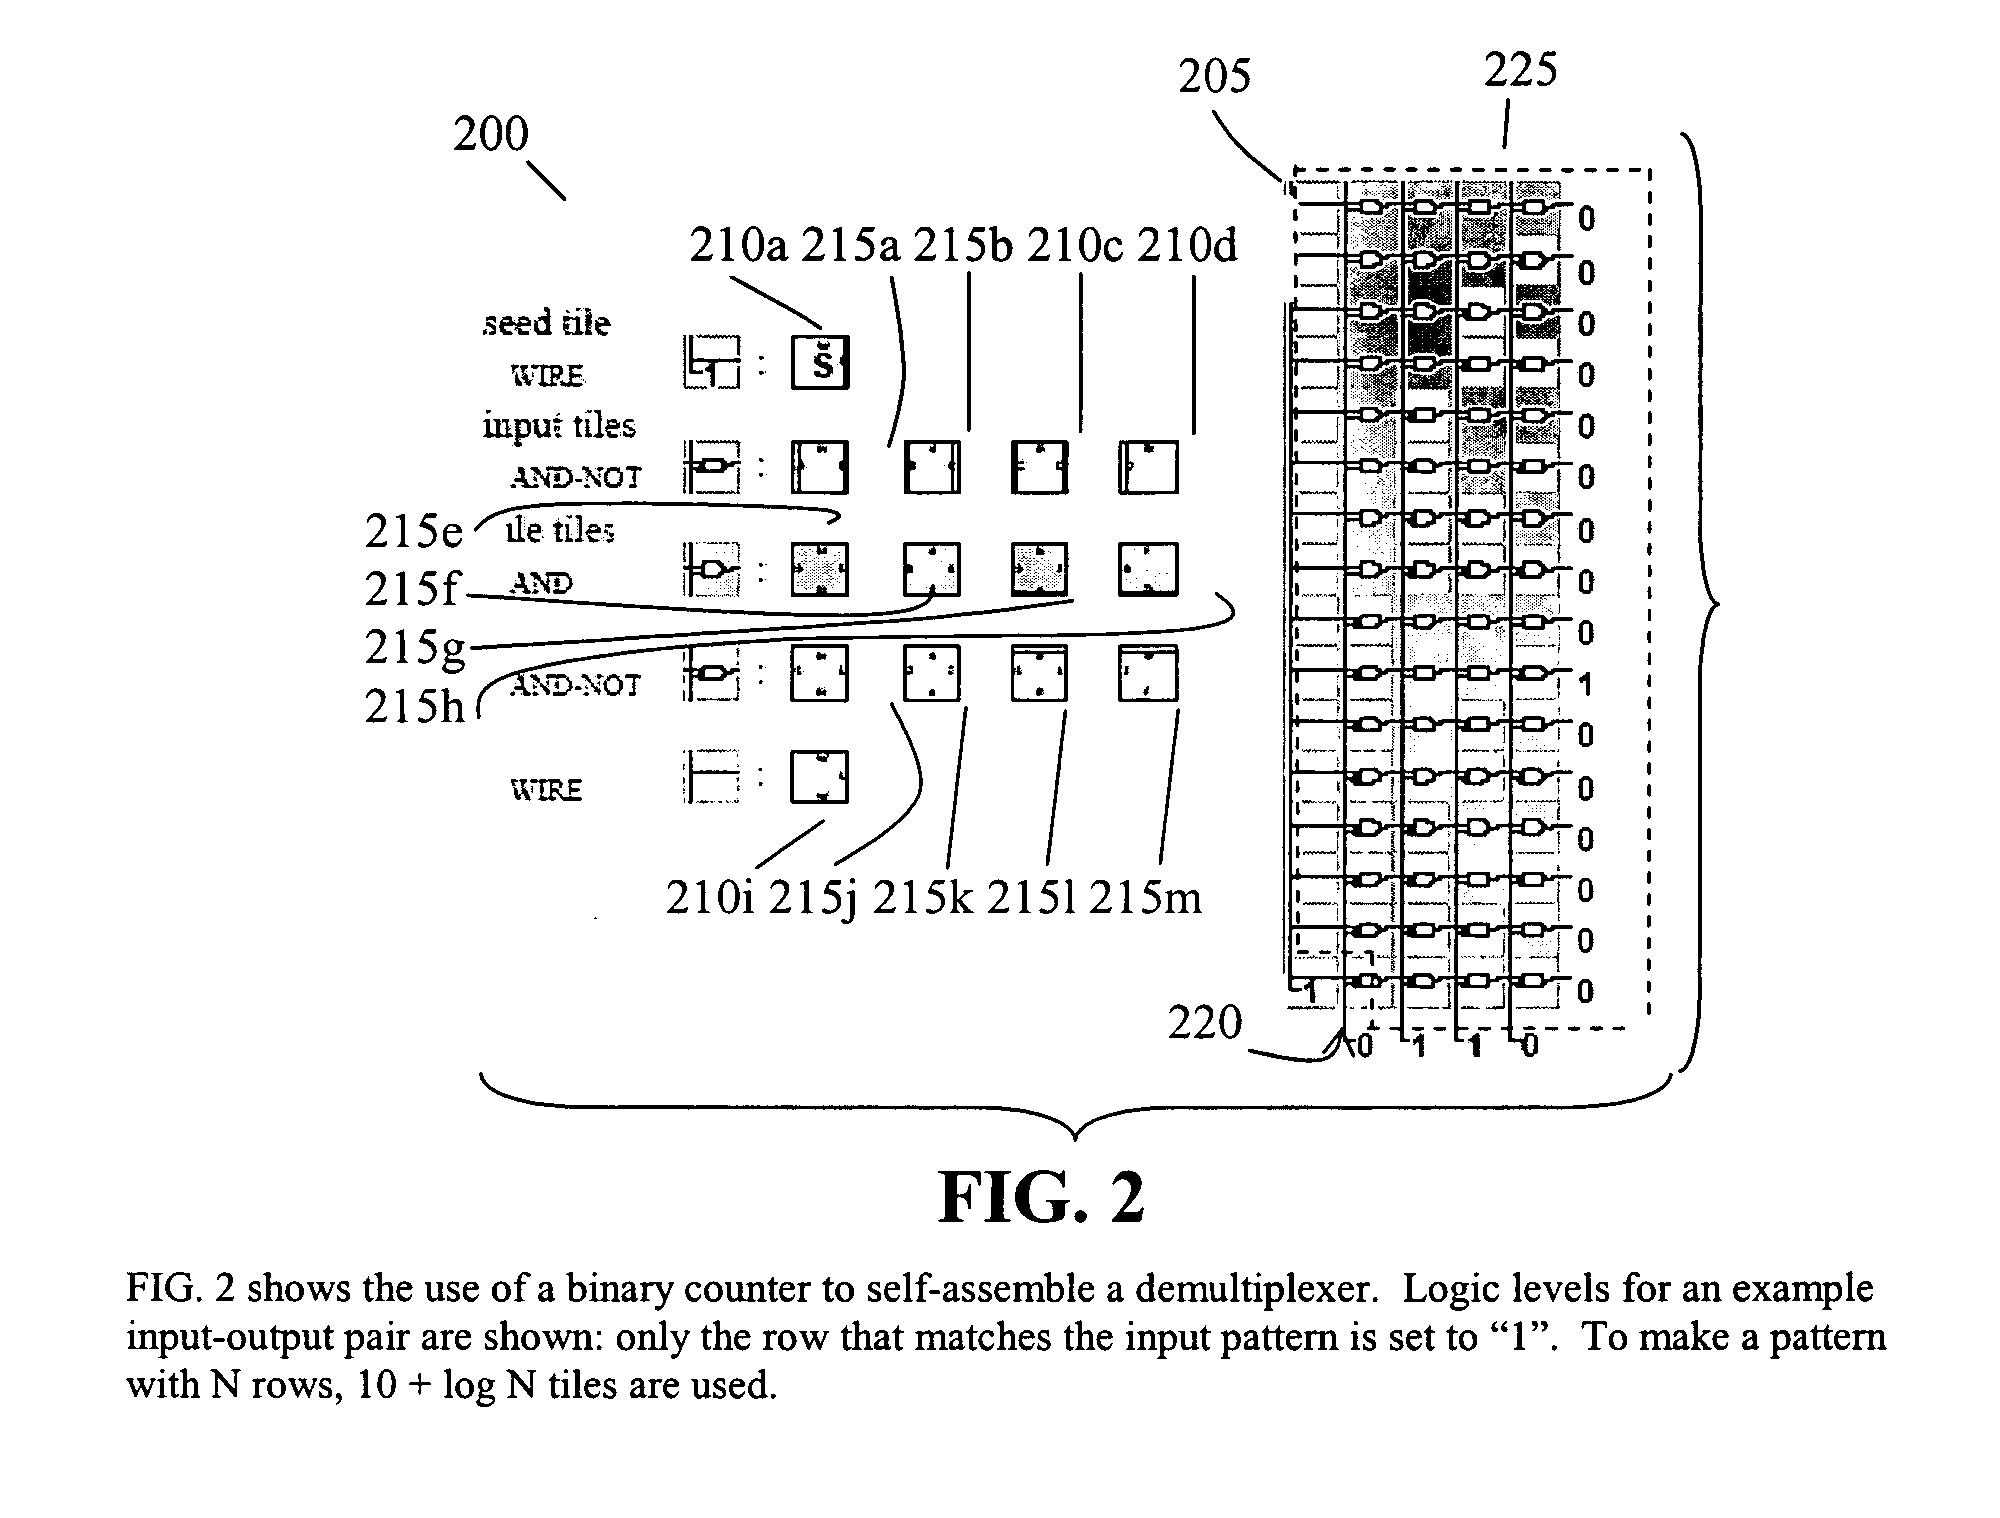 Self-assembled circuits and circuit patterns